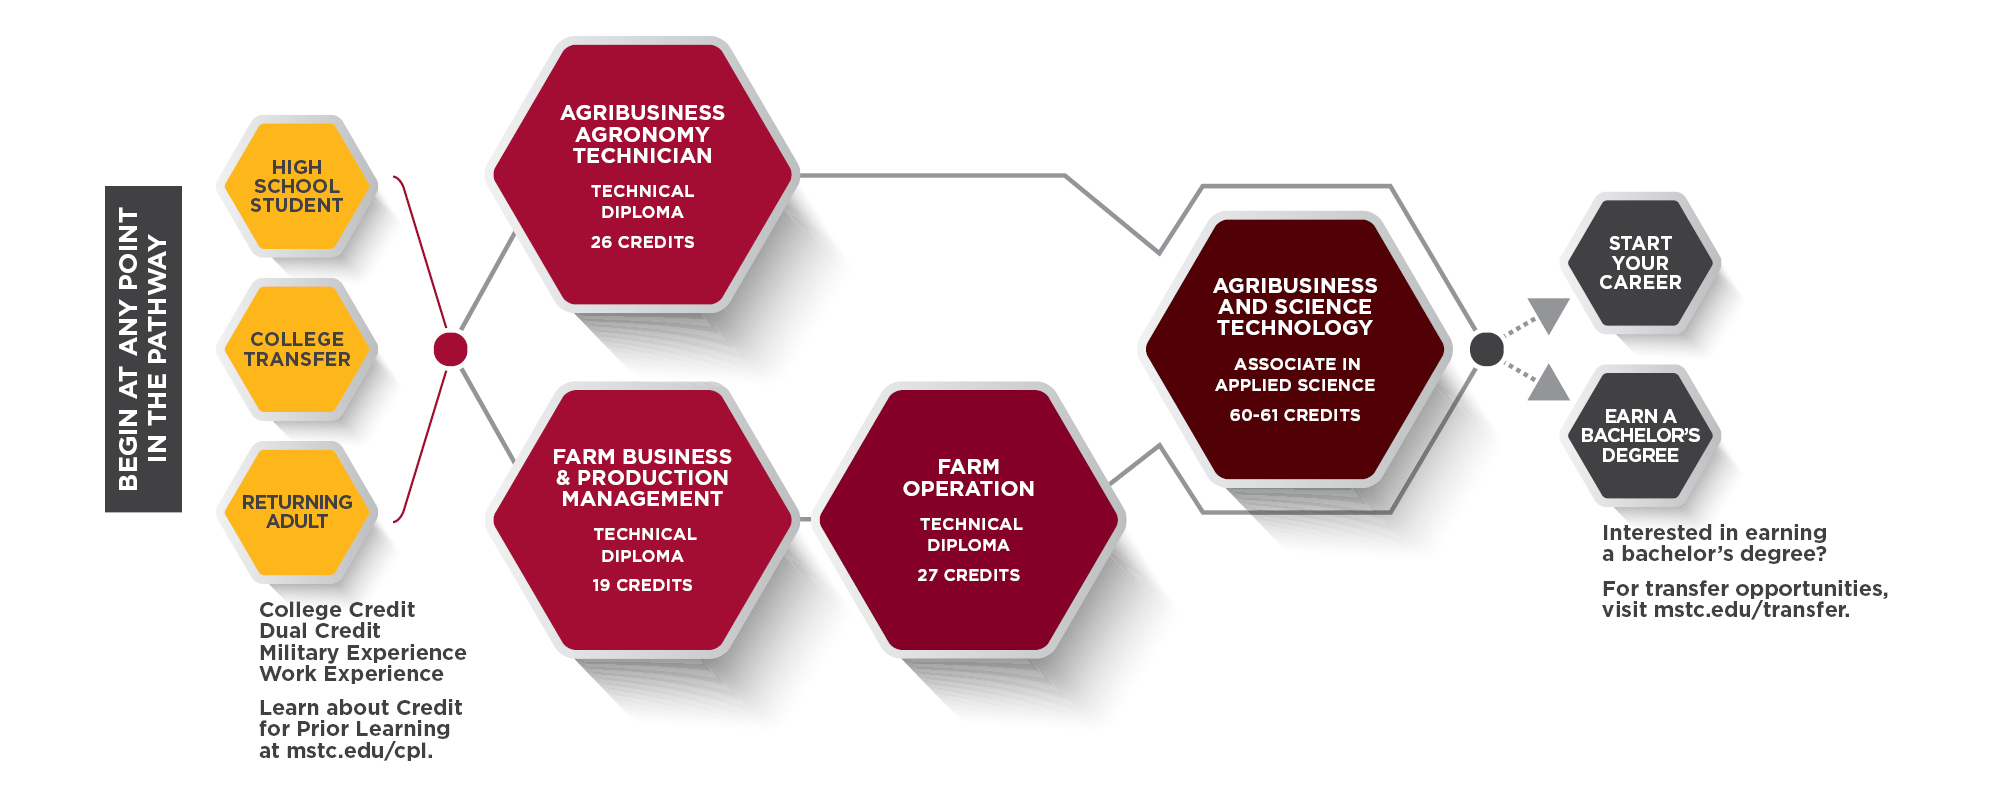 Agribusiness and Science Technology Program Pathway